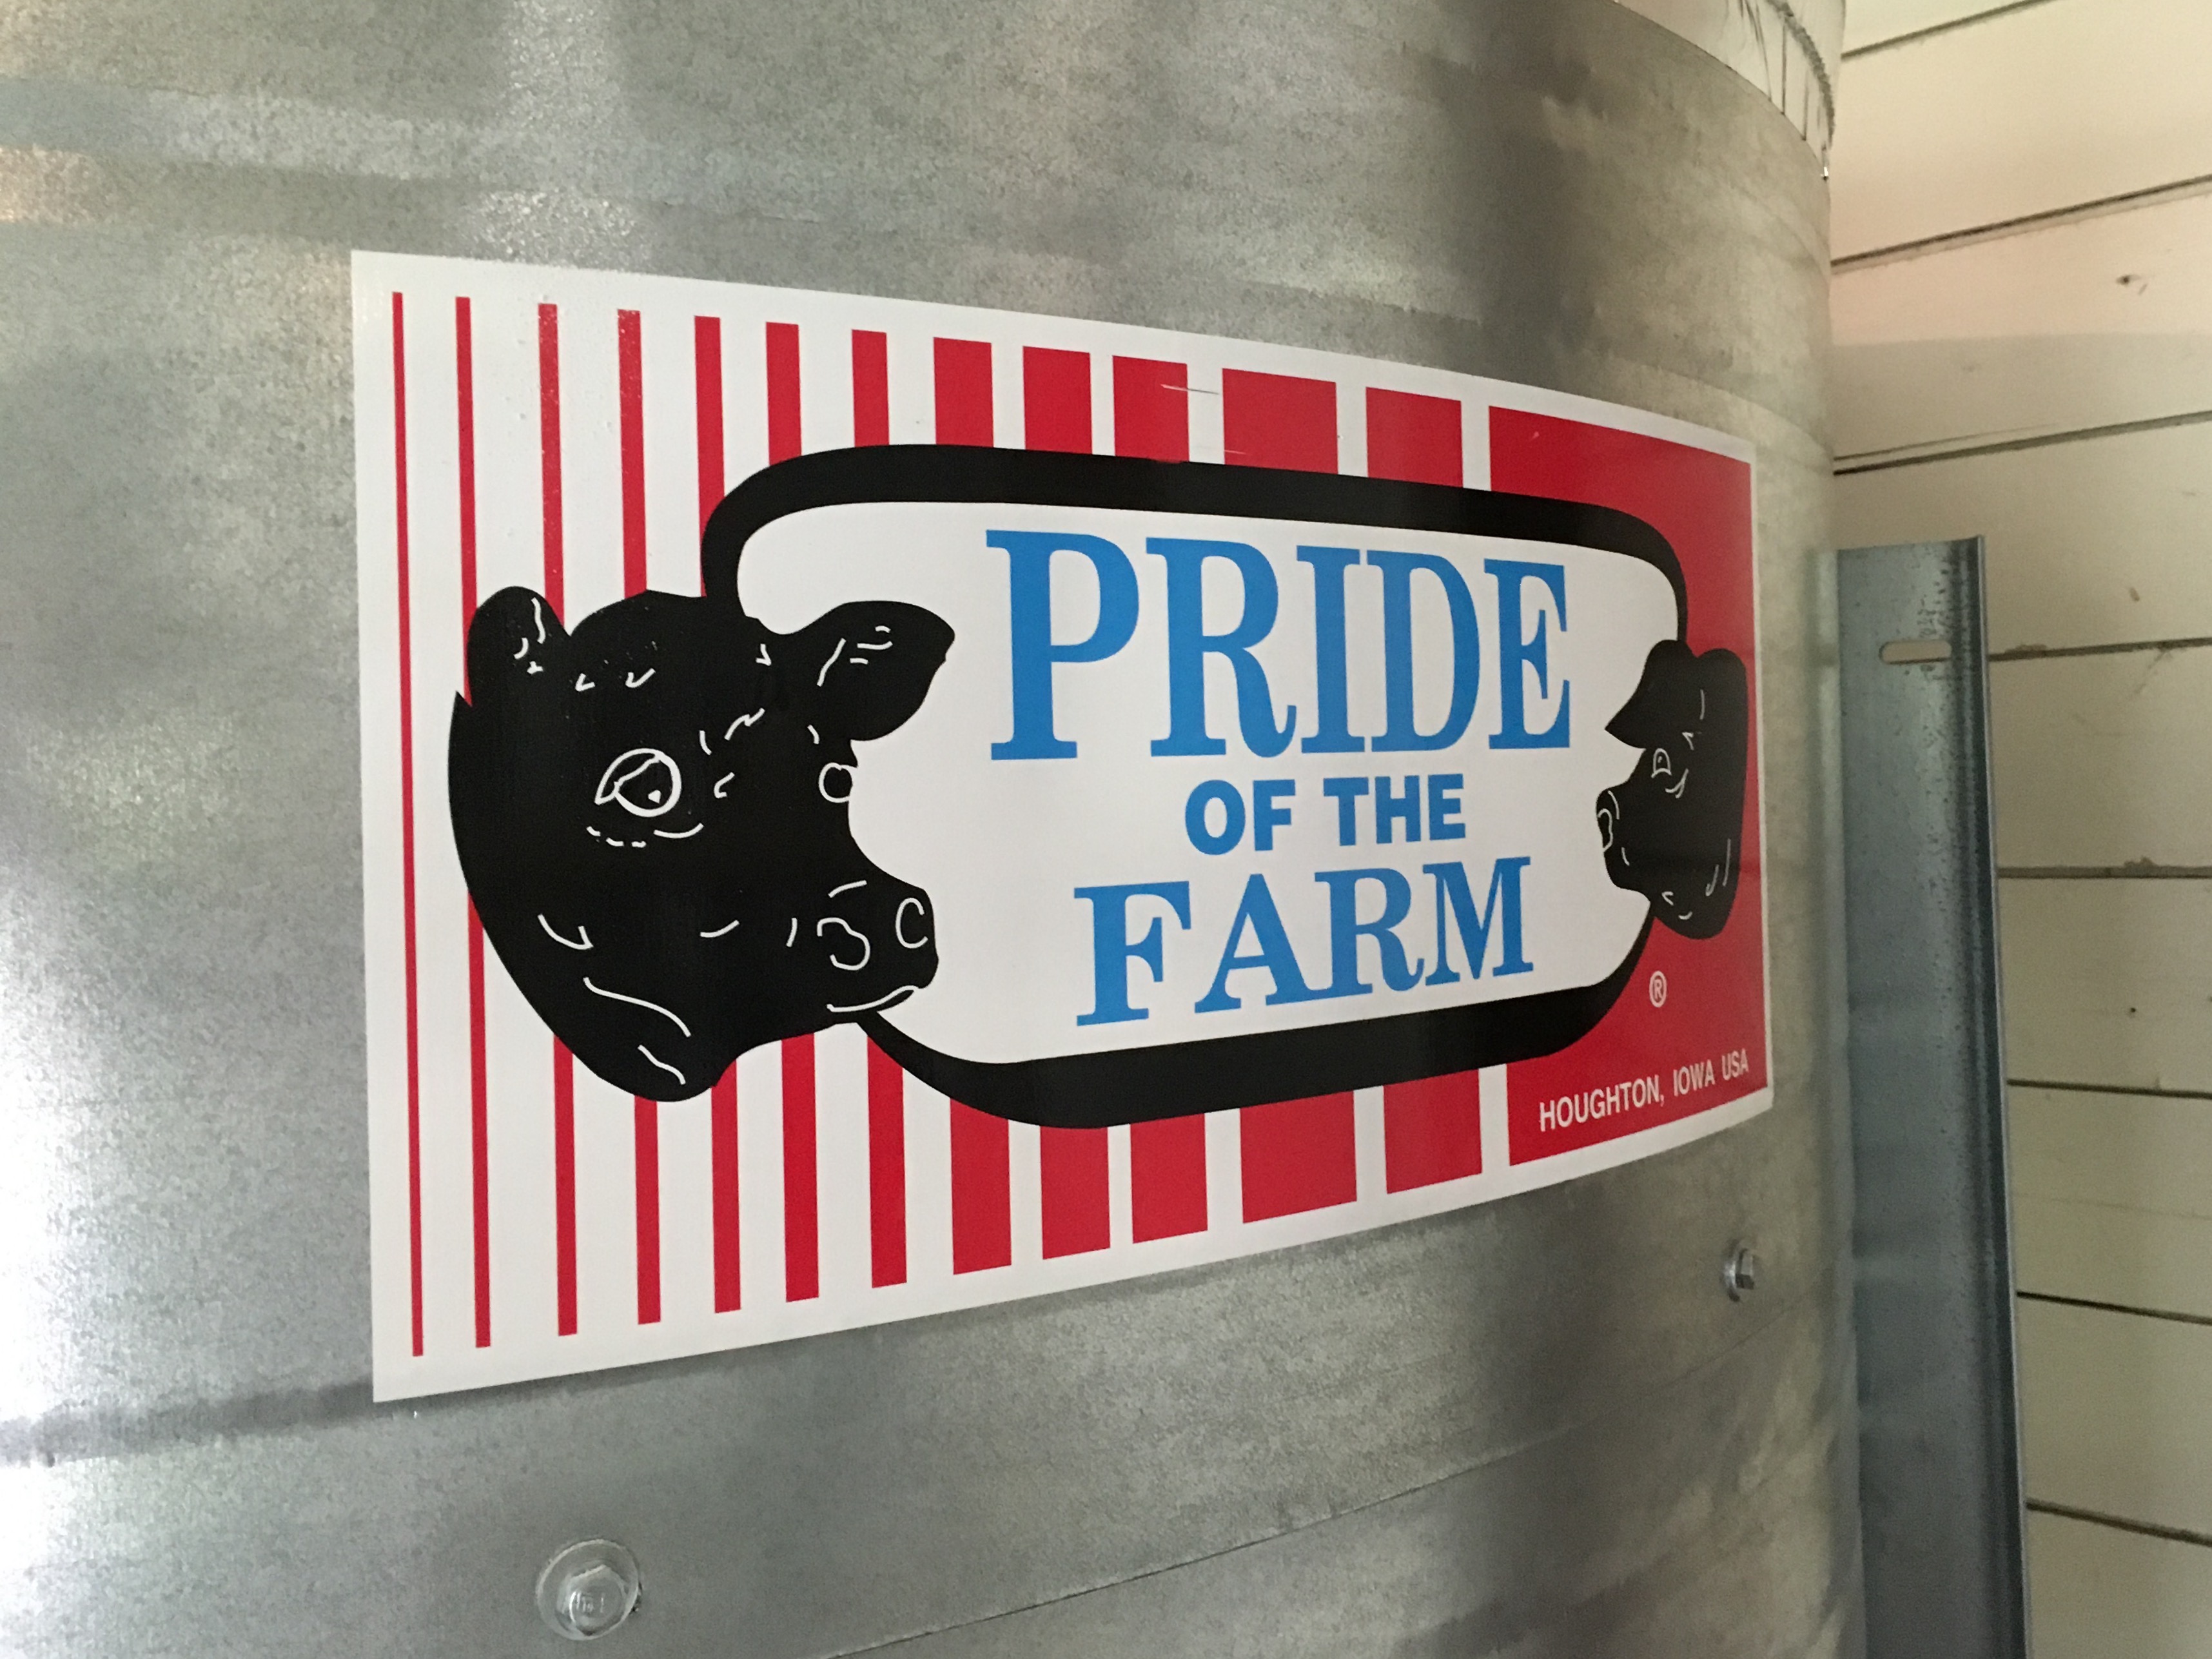 Its the "Pride of the Farm" grain bin at Wolves & People Farmhouse Brewery.